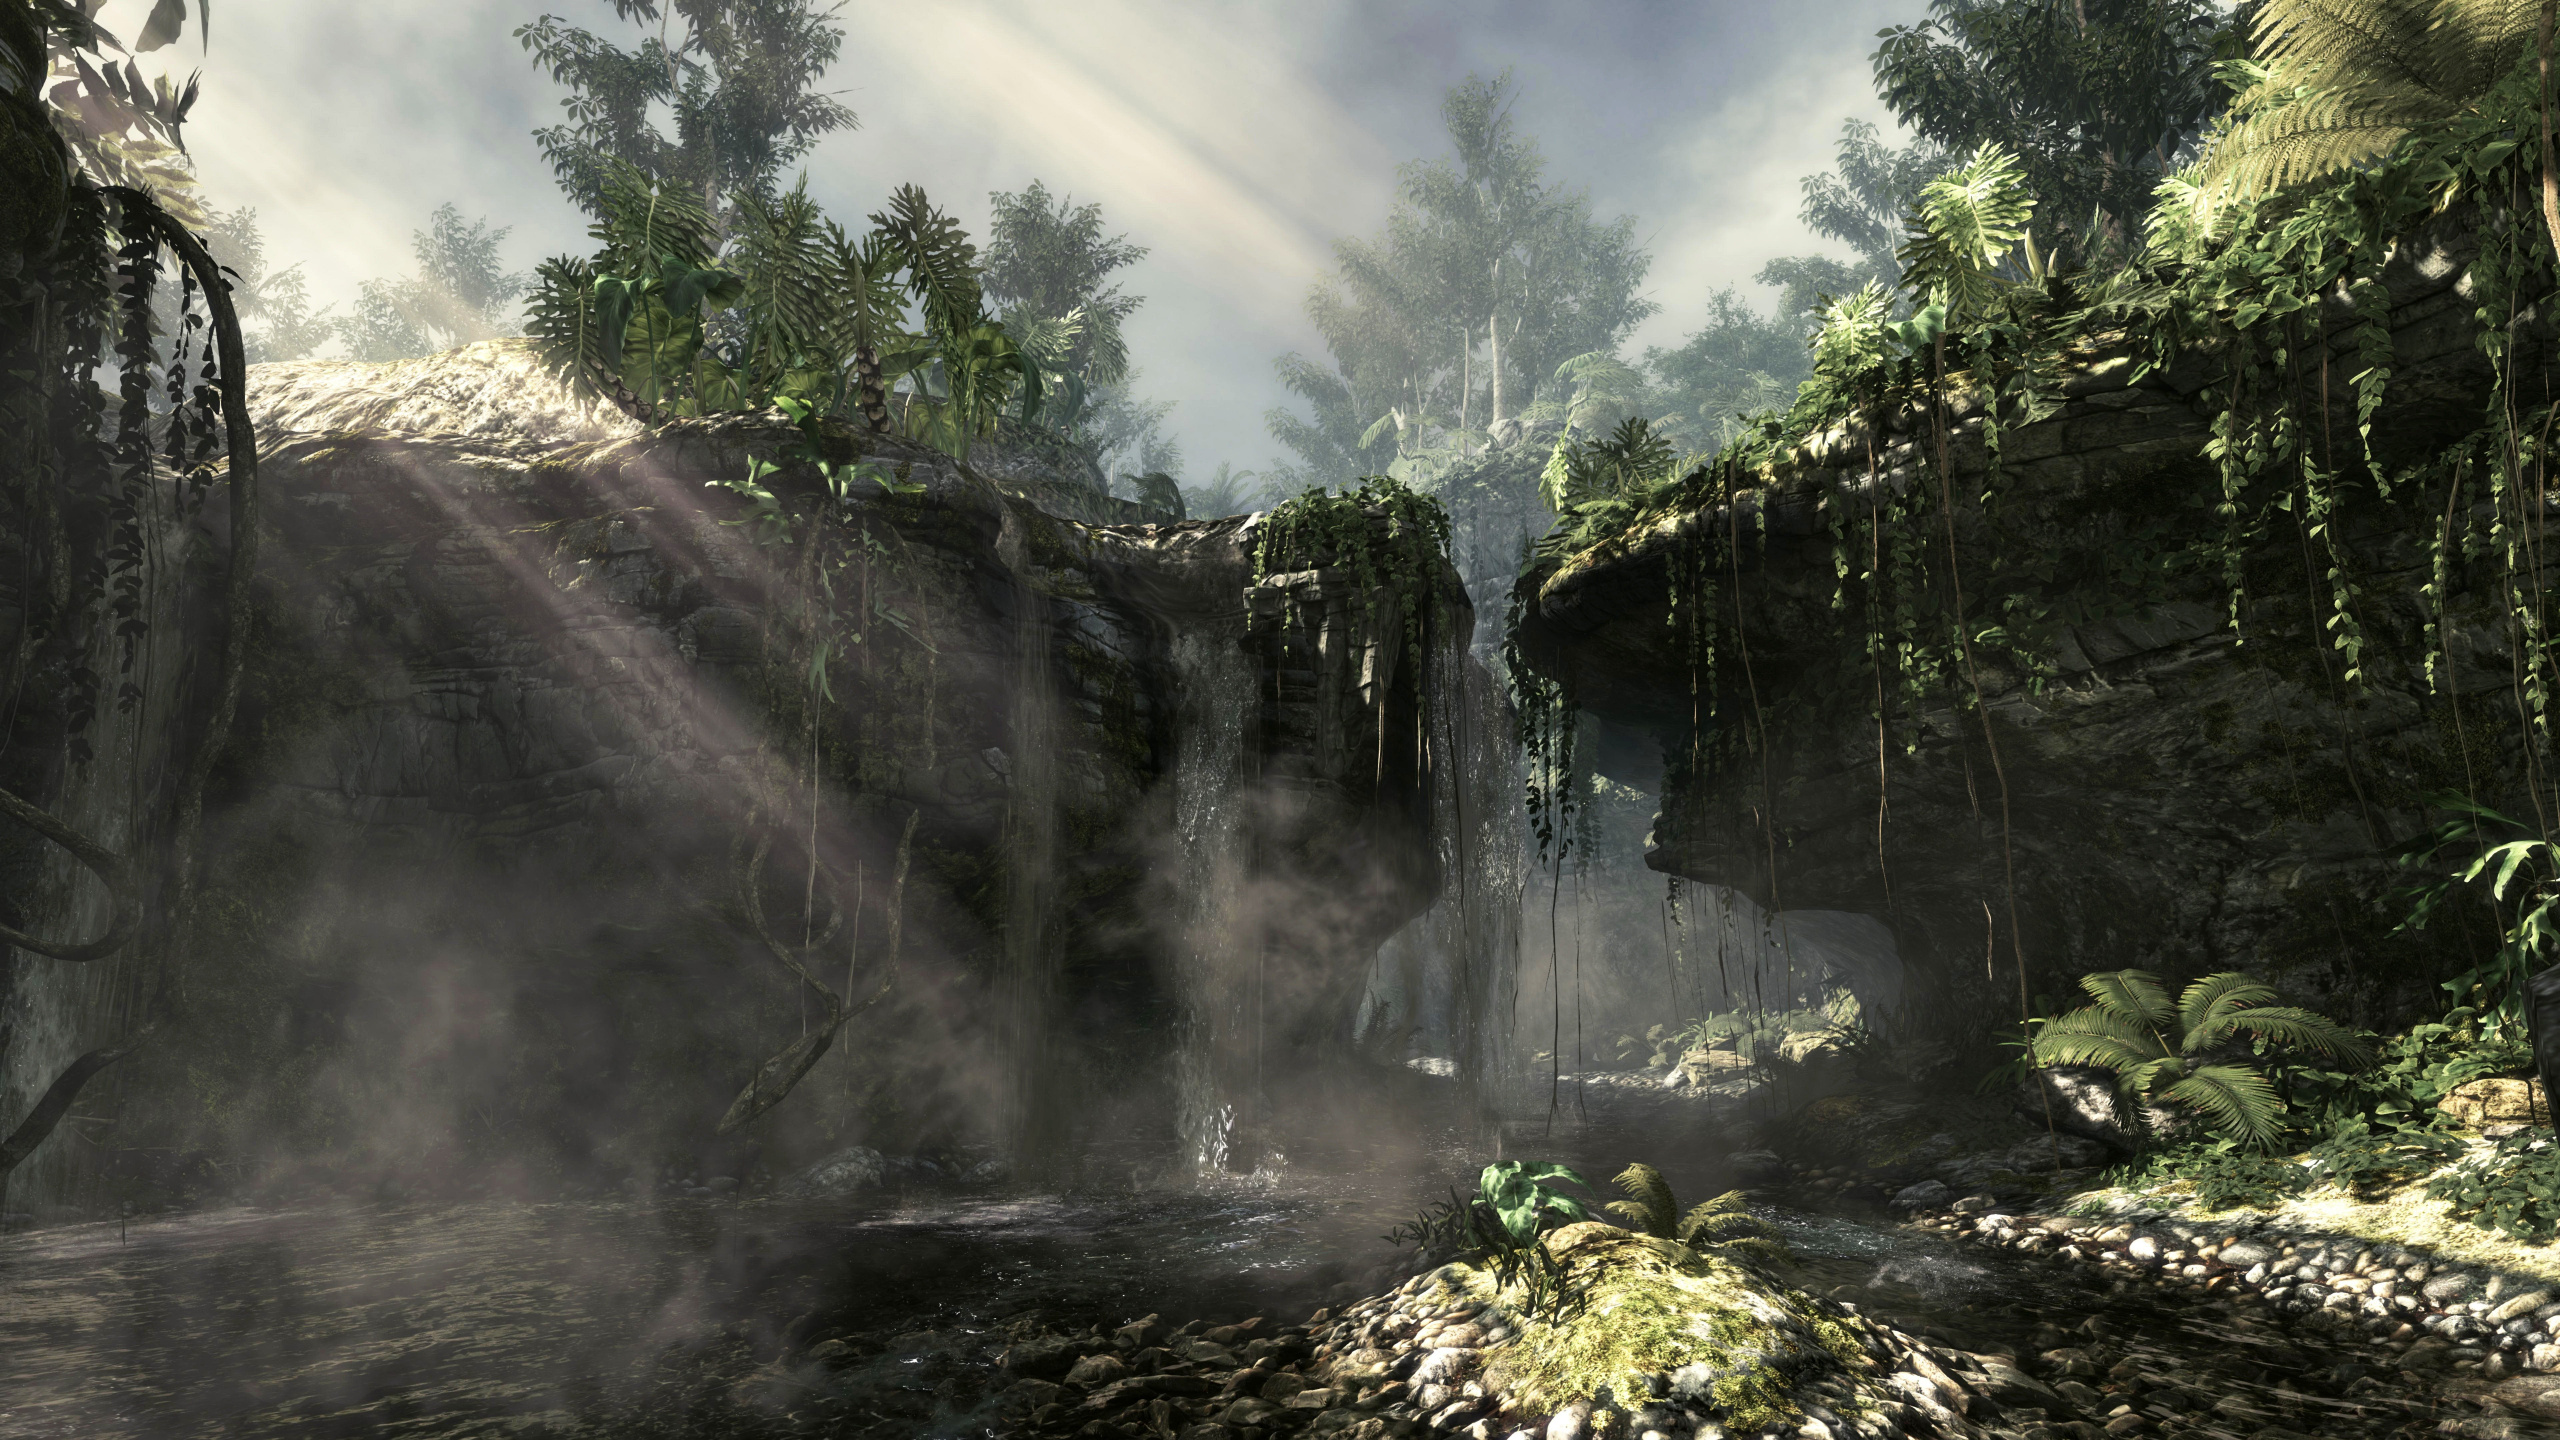 Call of Duty Ghosts, Call of Duty Black Ops Ii, Activision, Infinity Ward, Vegetation. Wallpaper in 2560x1440 Resolution